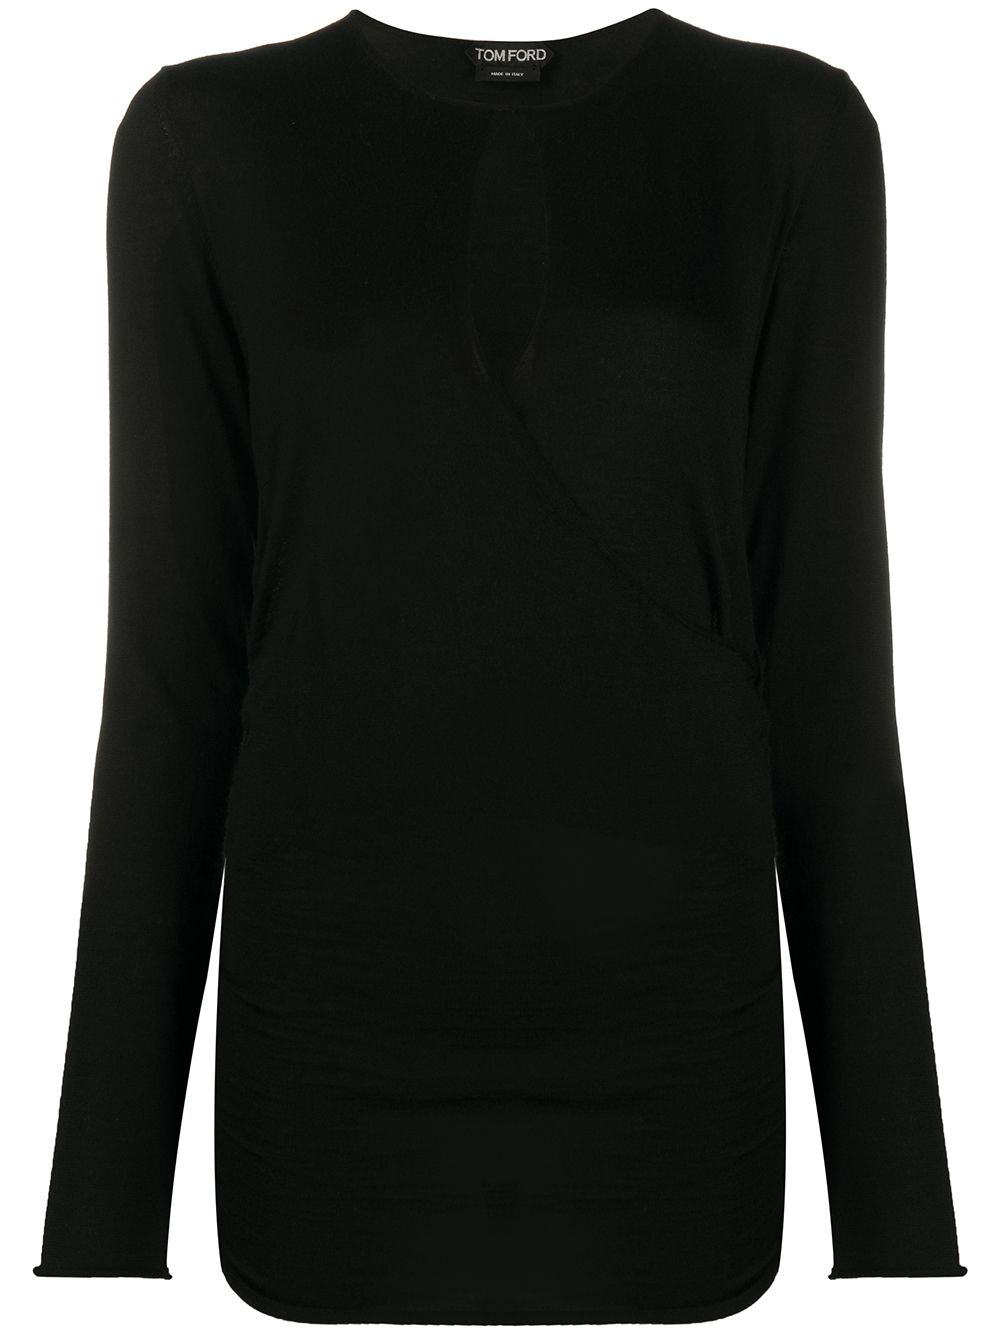 TOM FORD WRAP STYLE KNITTED TOP